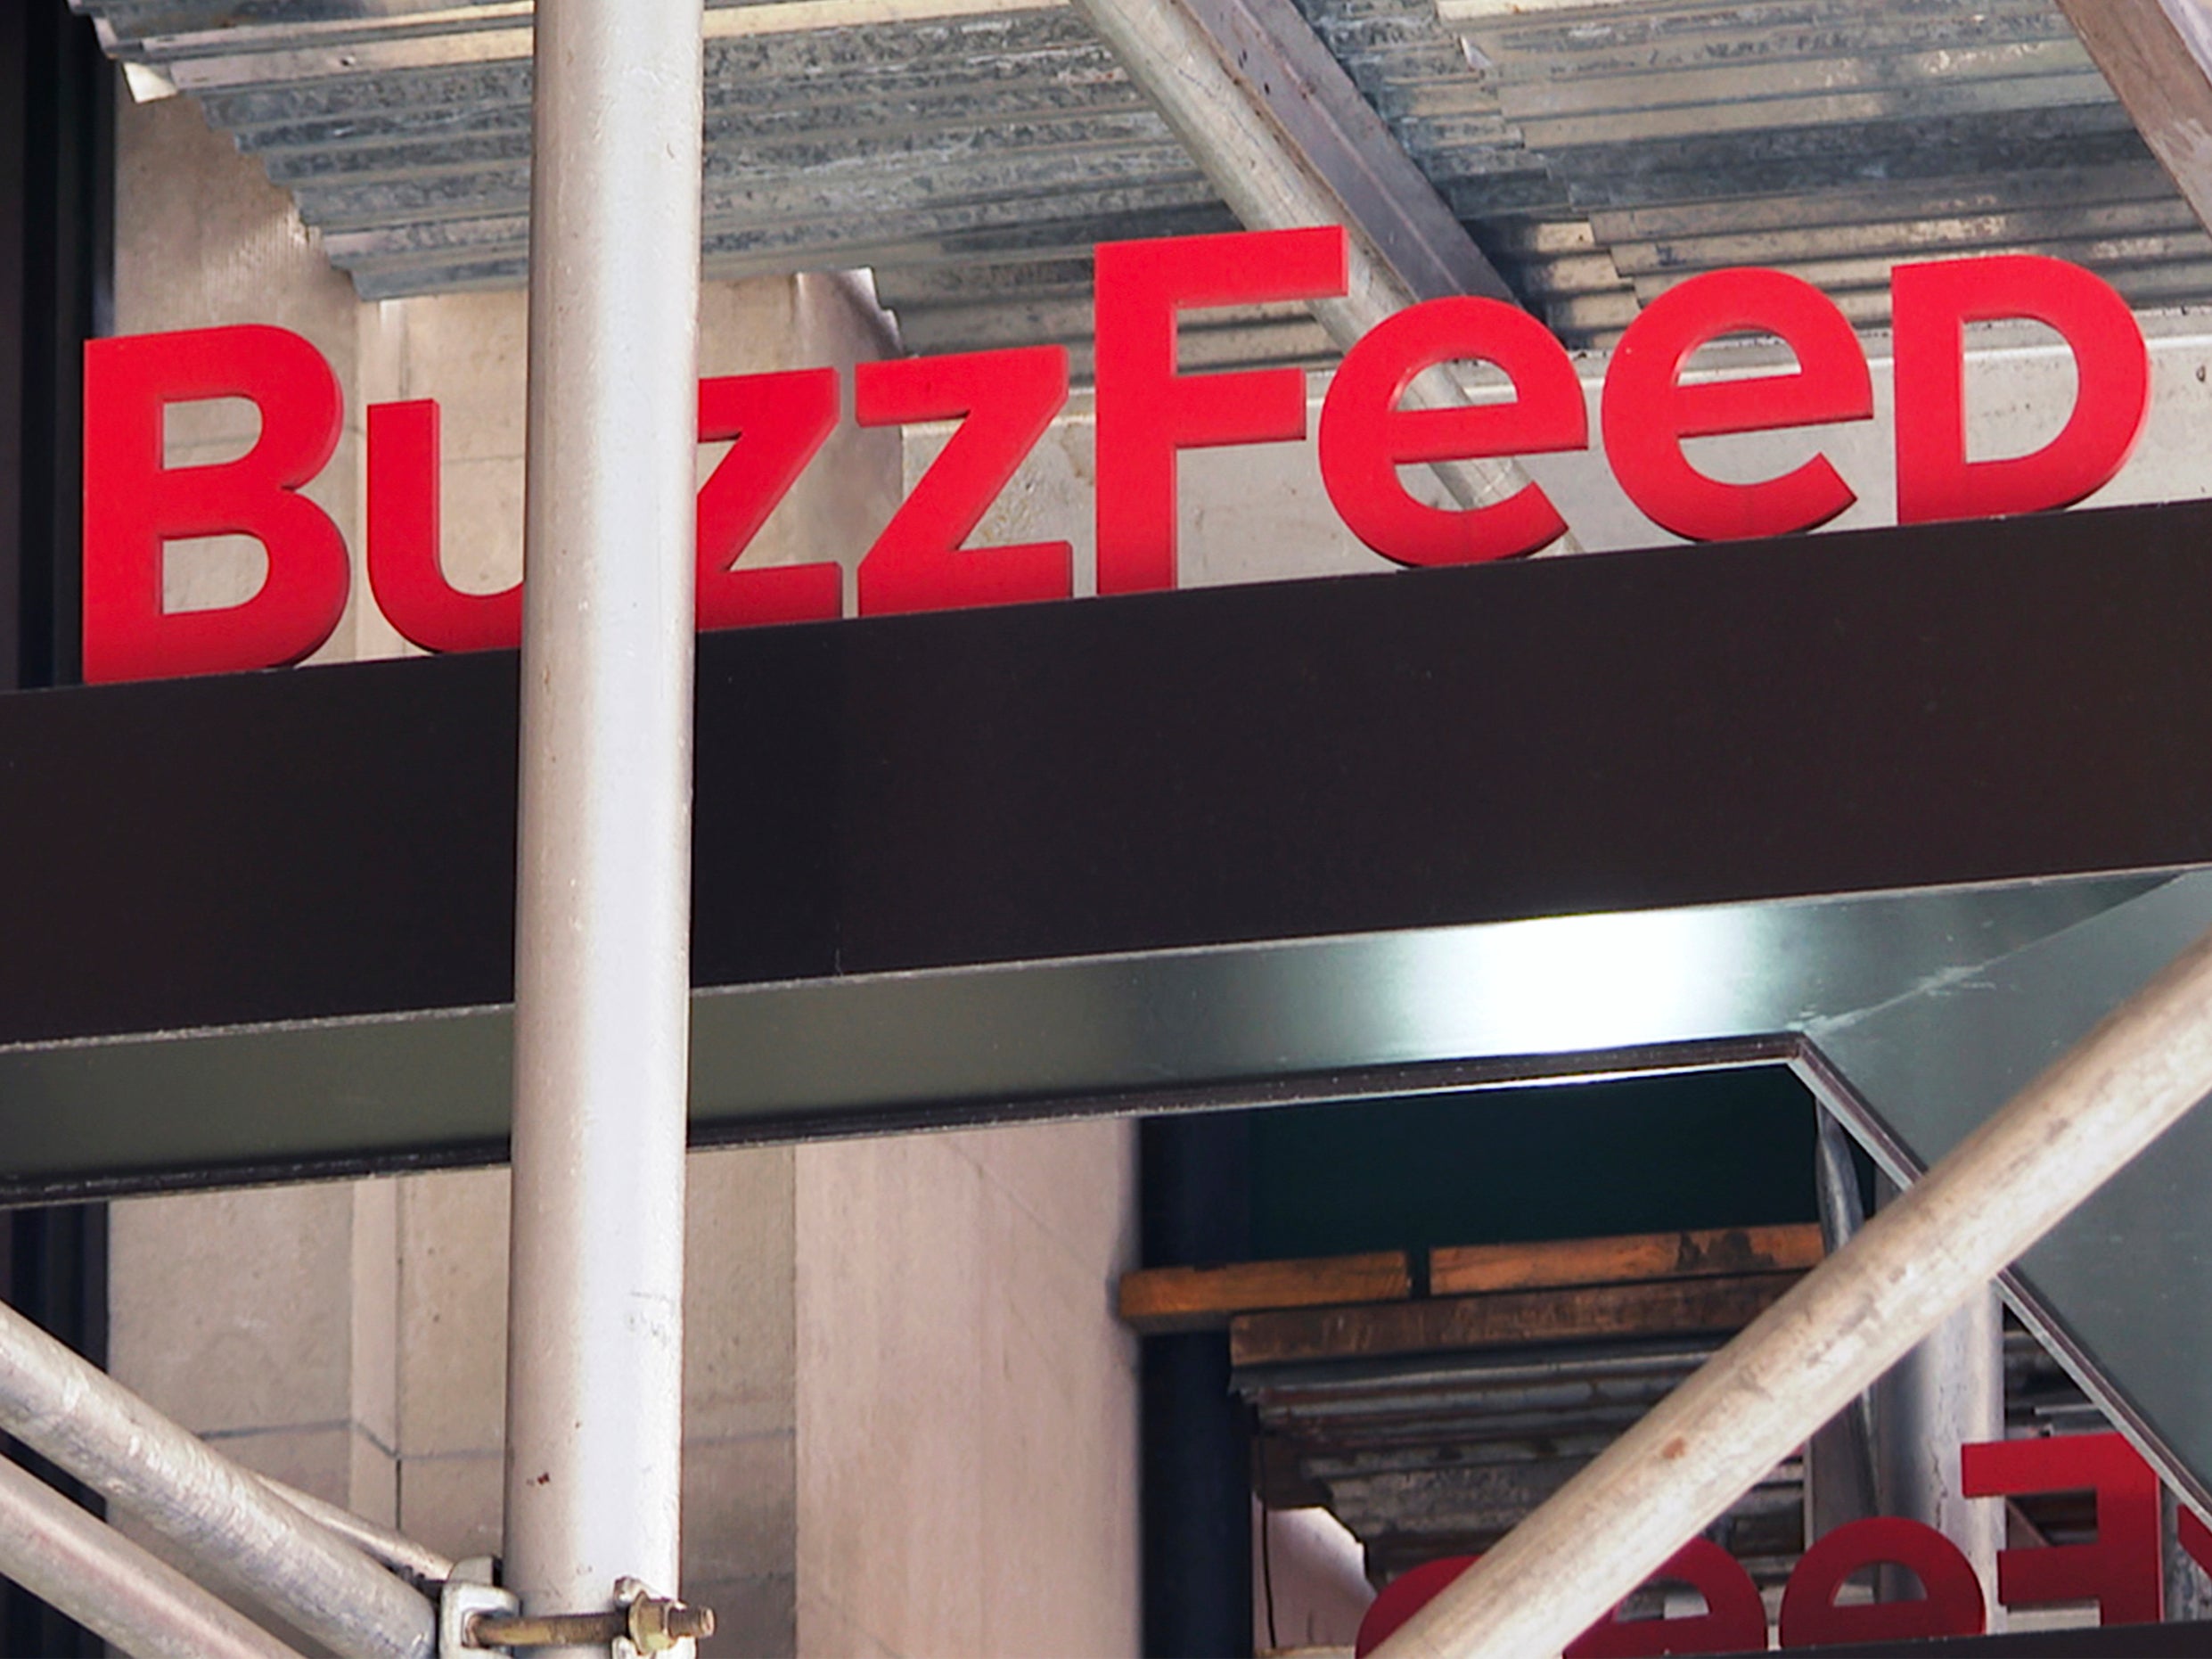 Buzzfeed announced that it has laid off 45 reporters, editors and producers from the newly acquired HuffPost. The dismissals come three weeks after Buzzfeed acquired HuffPost from Verizon Media